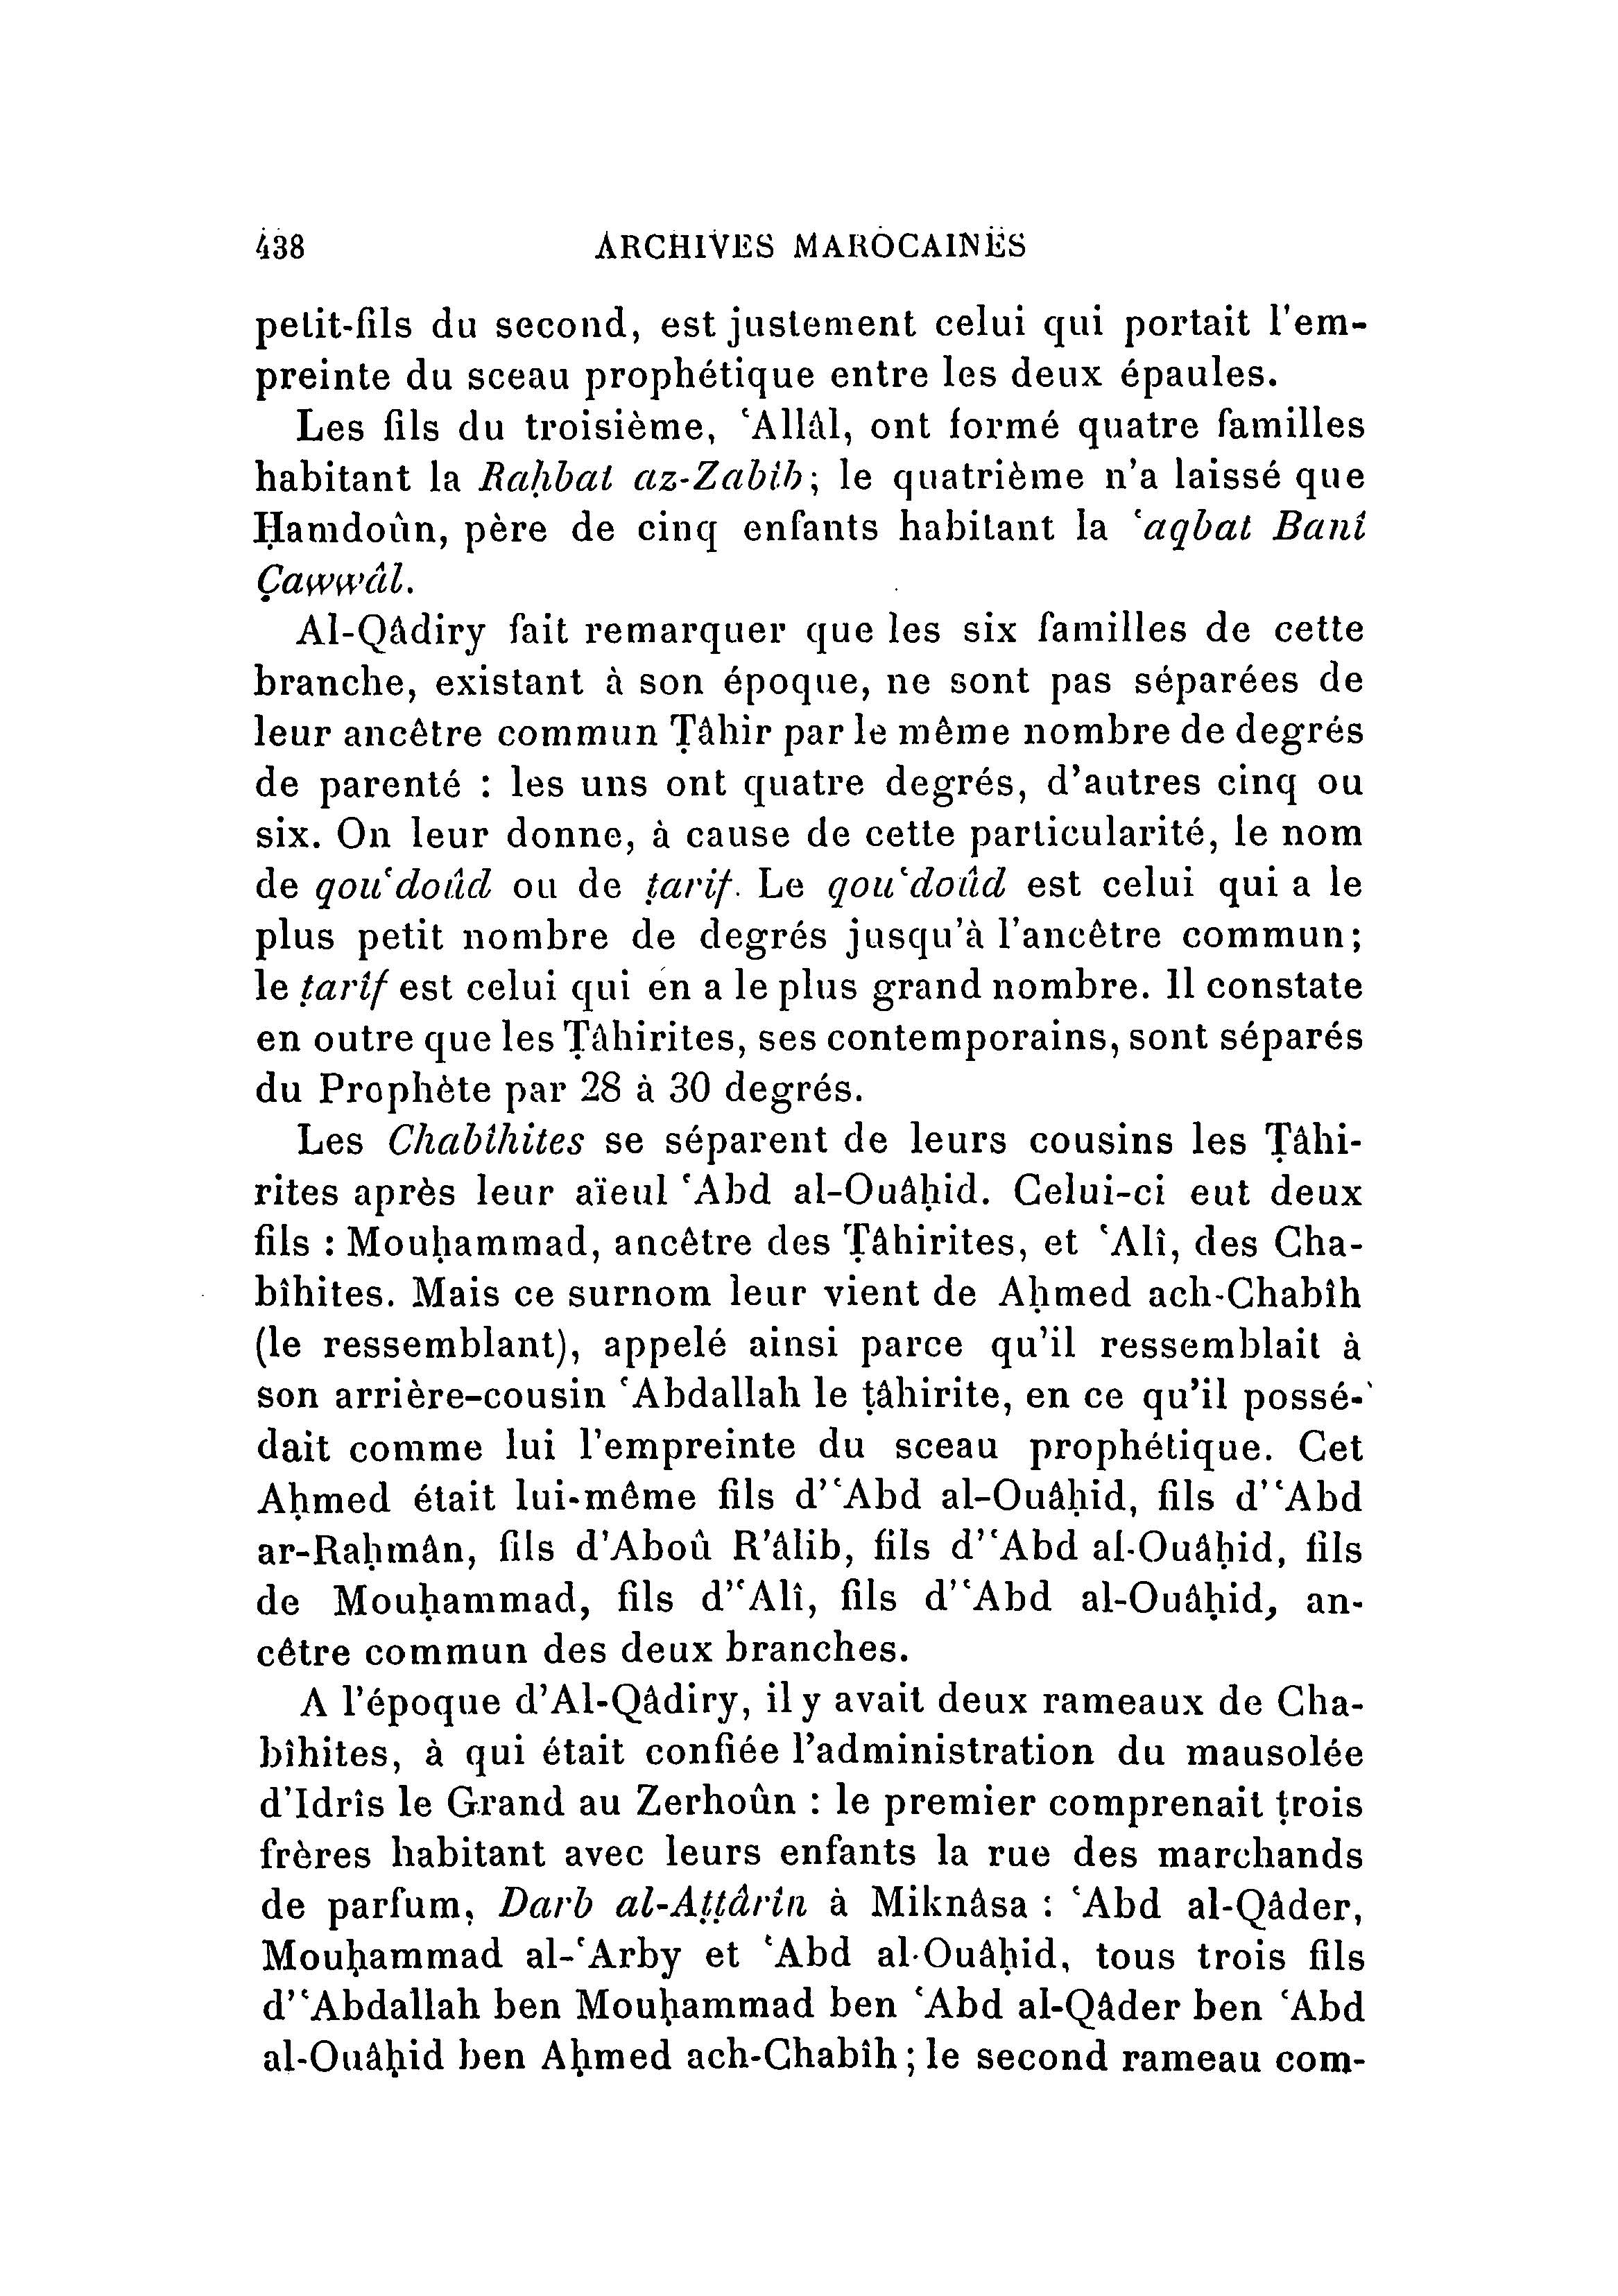 archives_marocaines-vol-1_page_450